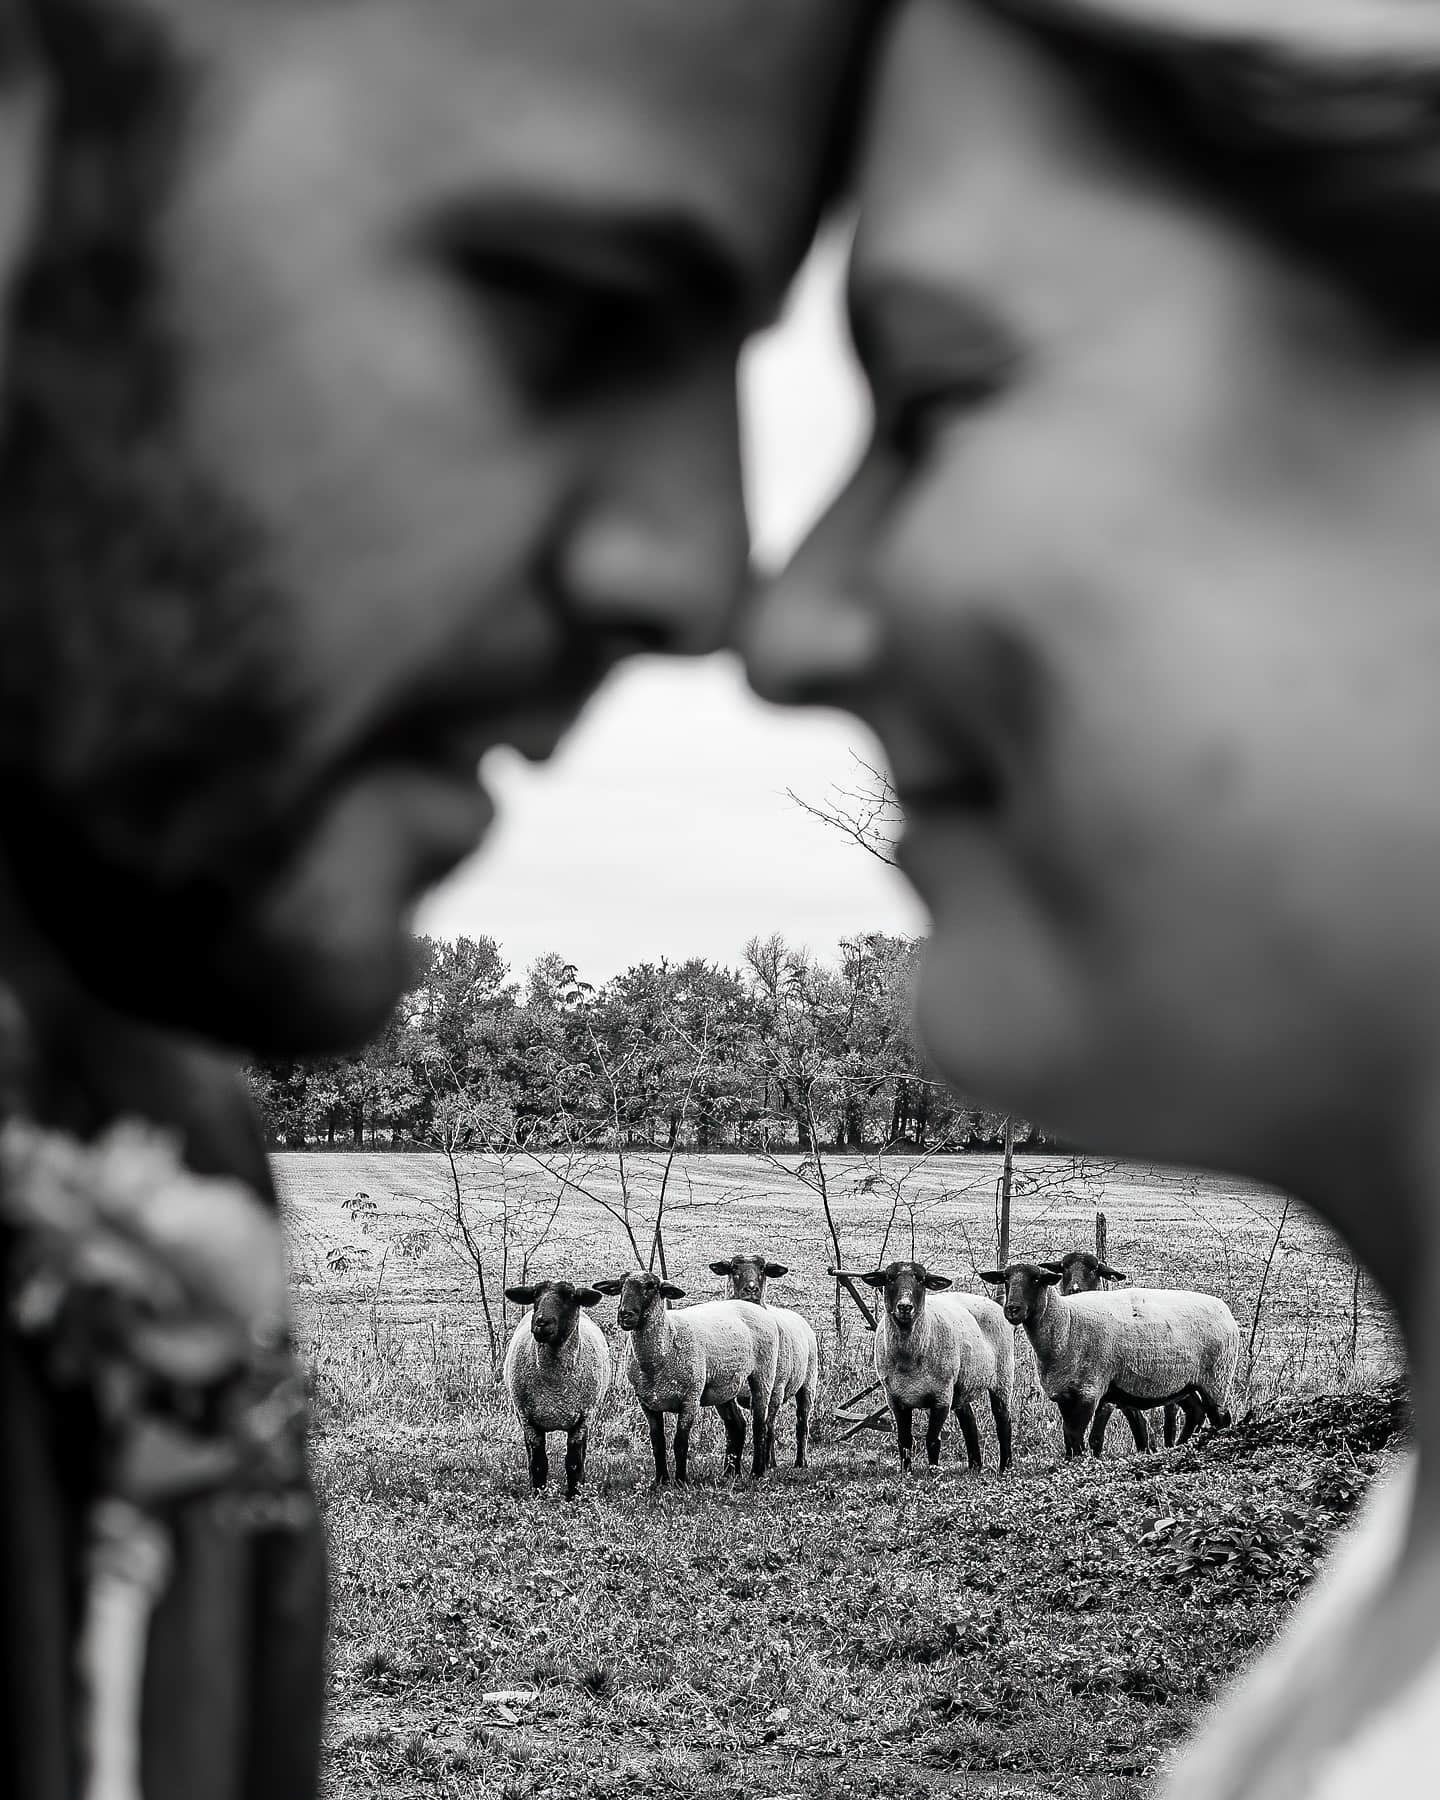 a off focus wedding couple in the foreground while there are sheep in the background